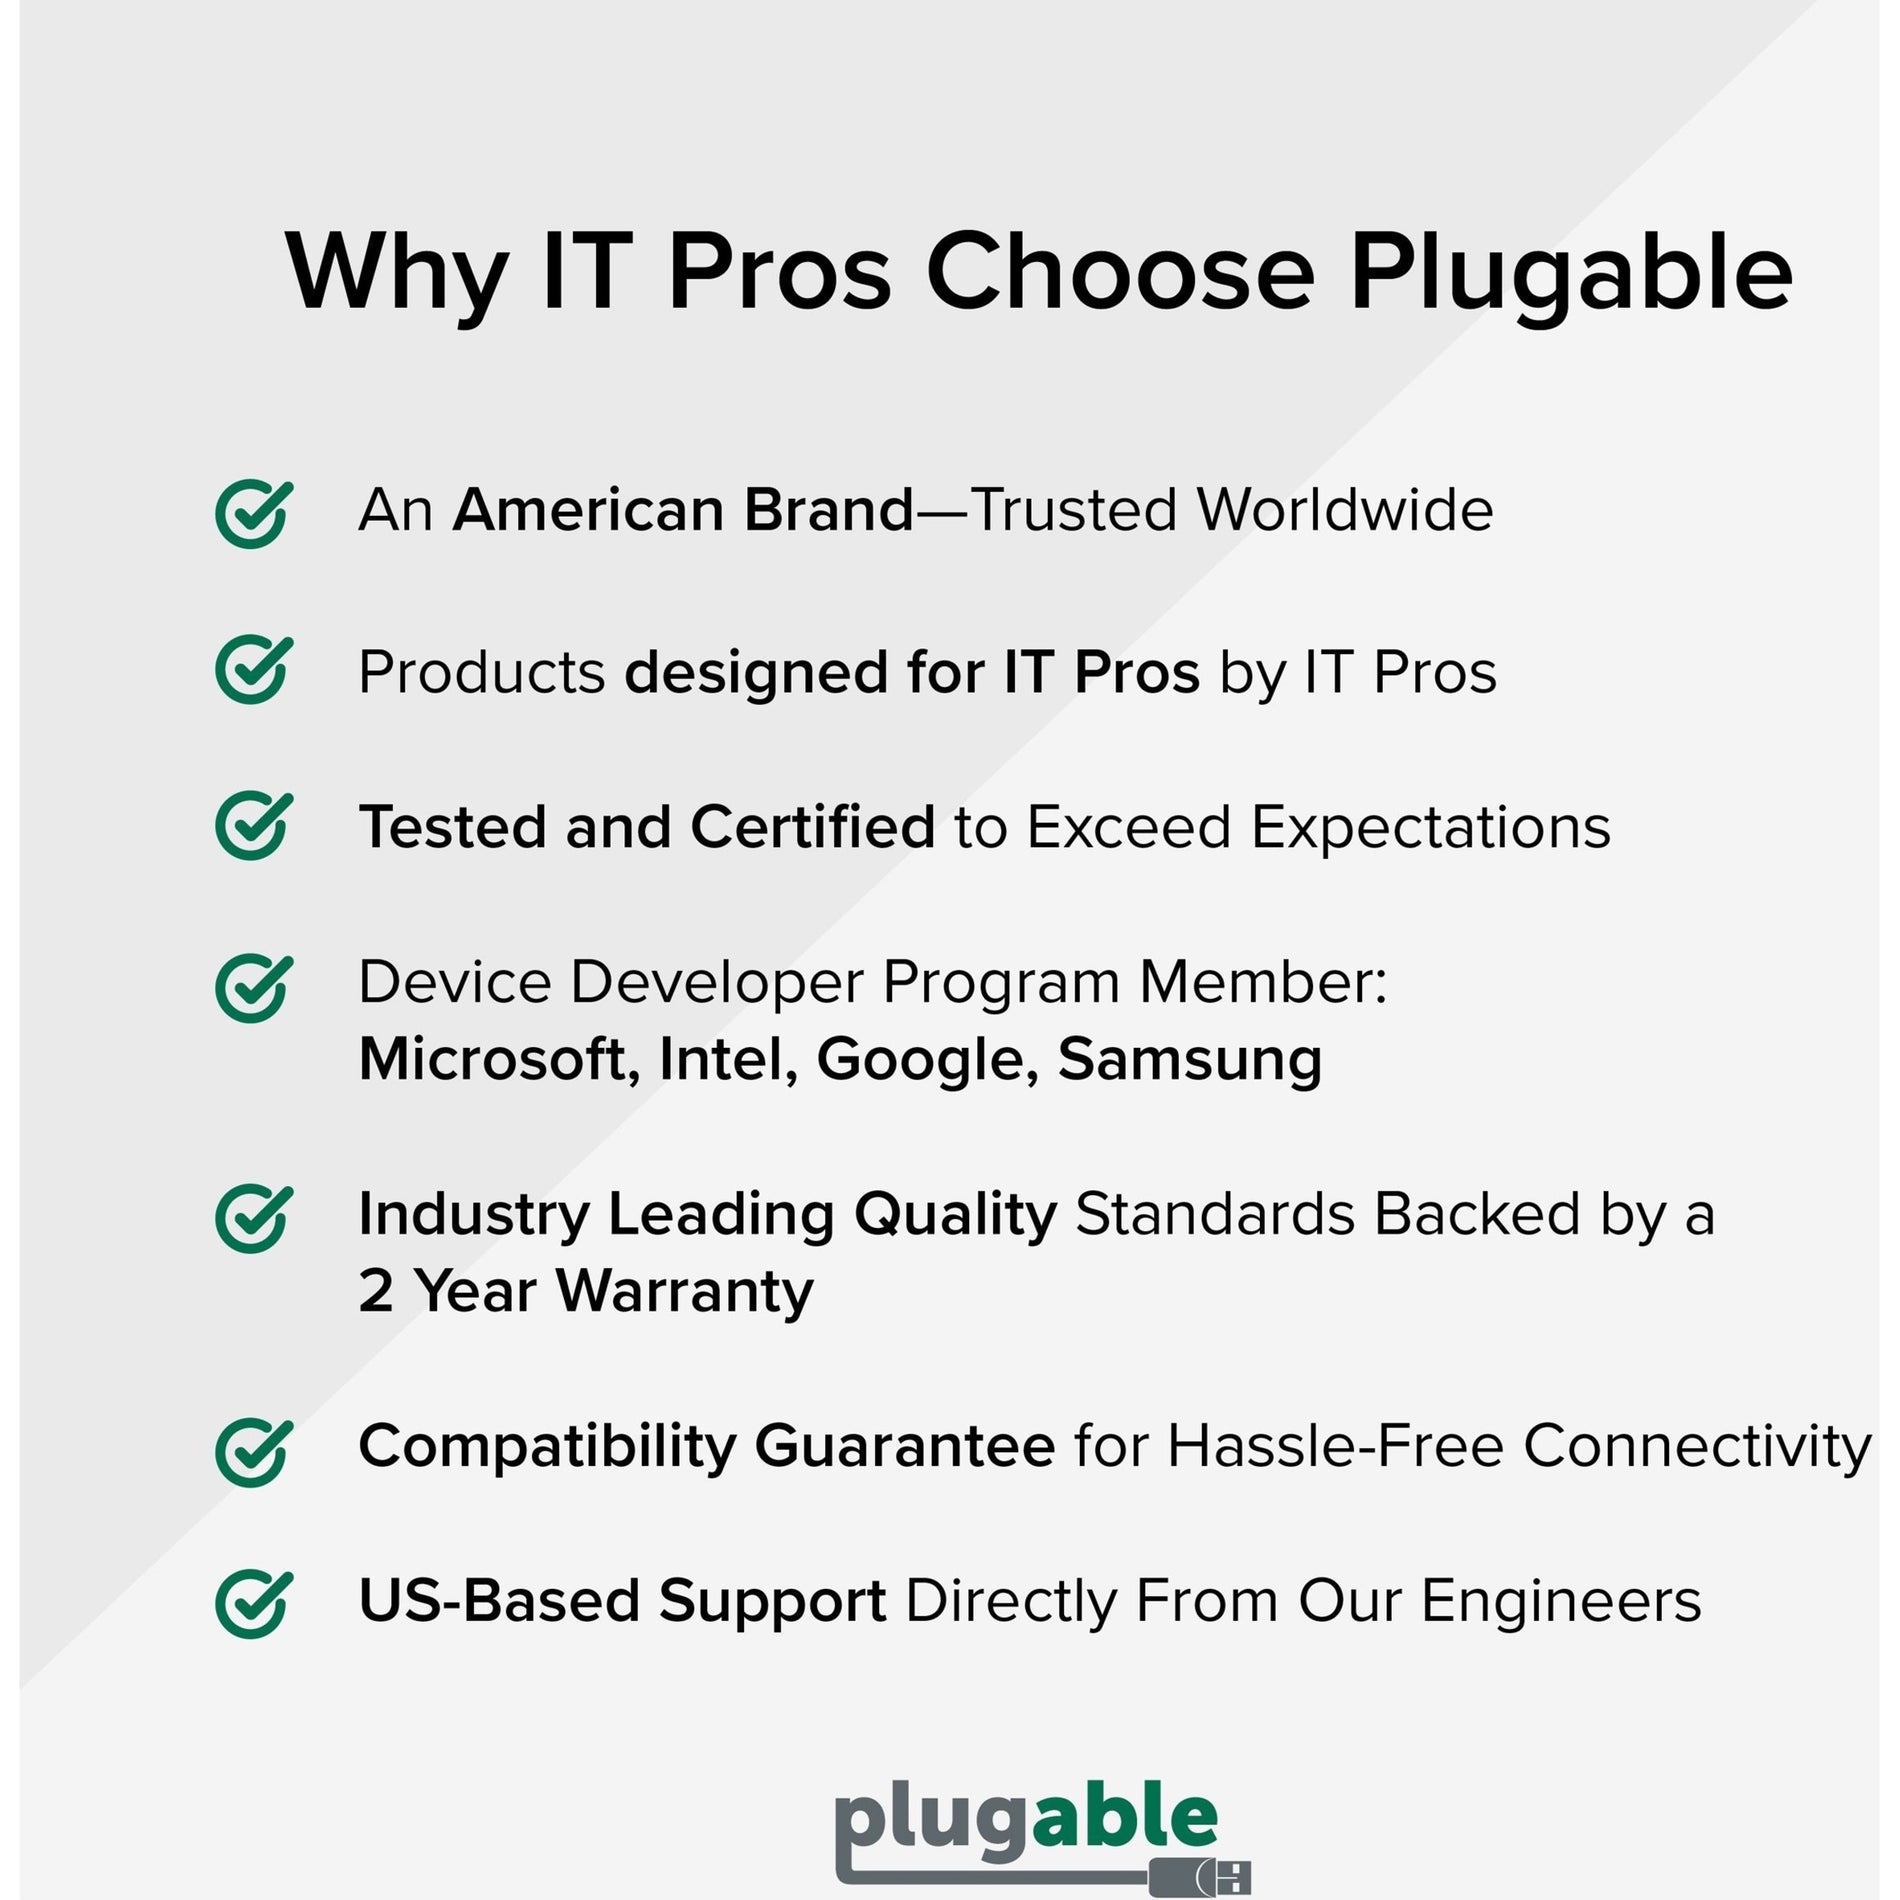 Plugable USB-VGA-165 USB 2.0 to VGA Video Graphics Adapter for Multiple Monitors up to 1920x1080, Windows-Compatible